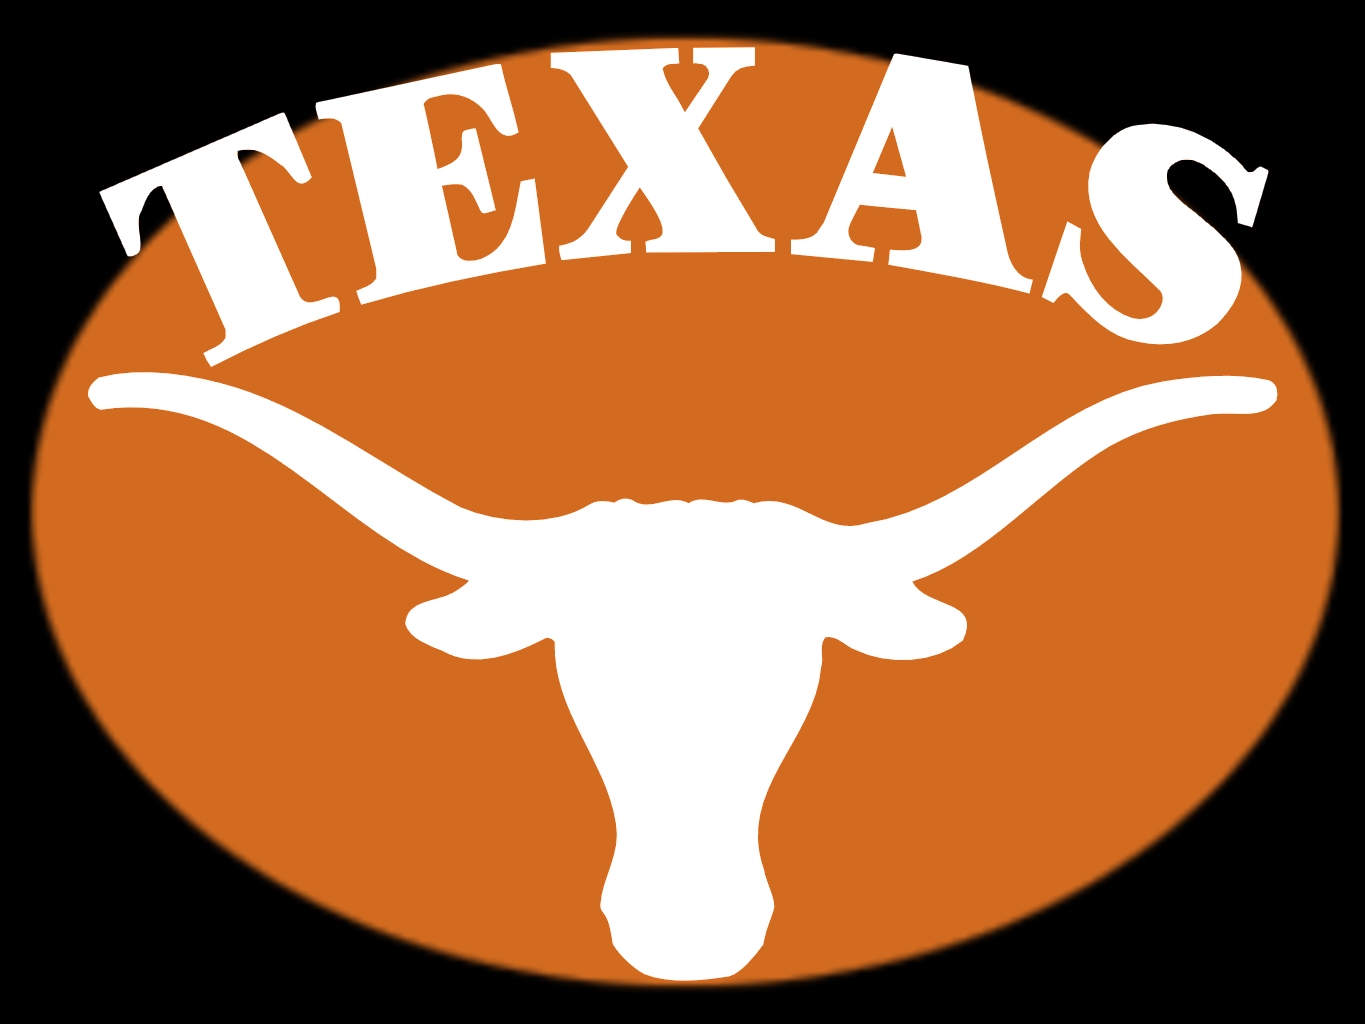 Cool Texas Longhorn Logo Made Pc Android iPhone And iPad Wallpaper